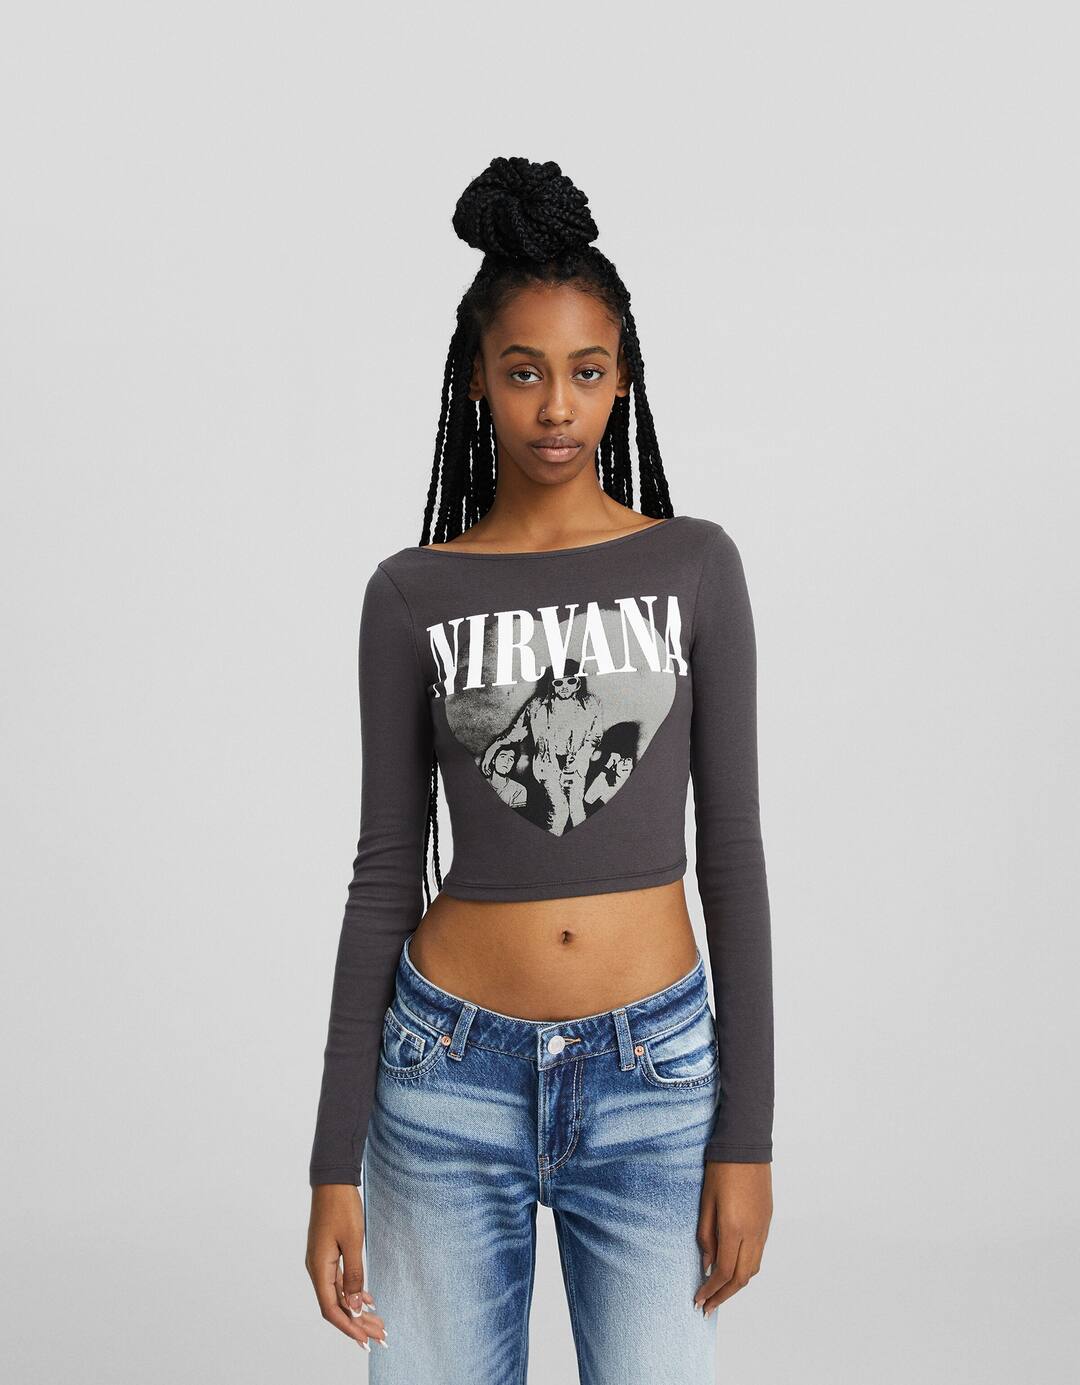 Nirvana T-shirt with long sleeves and open back with print